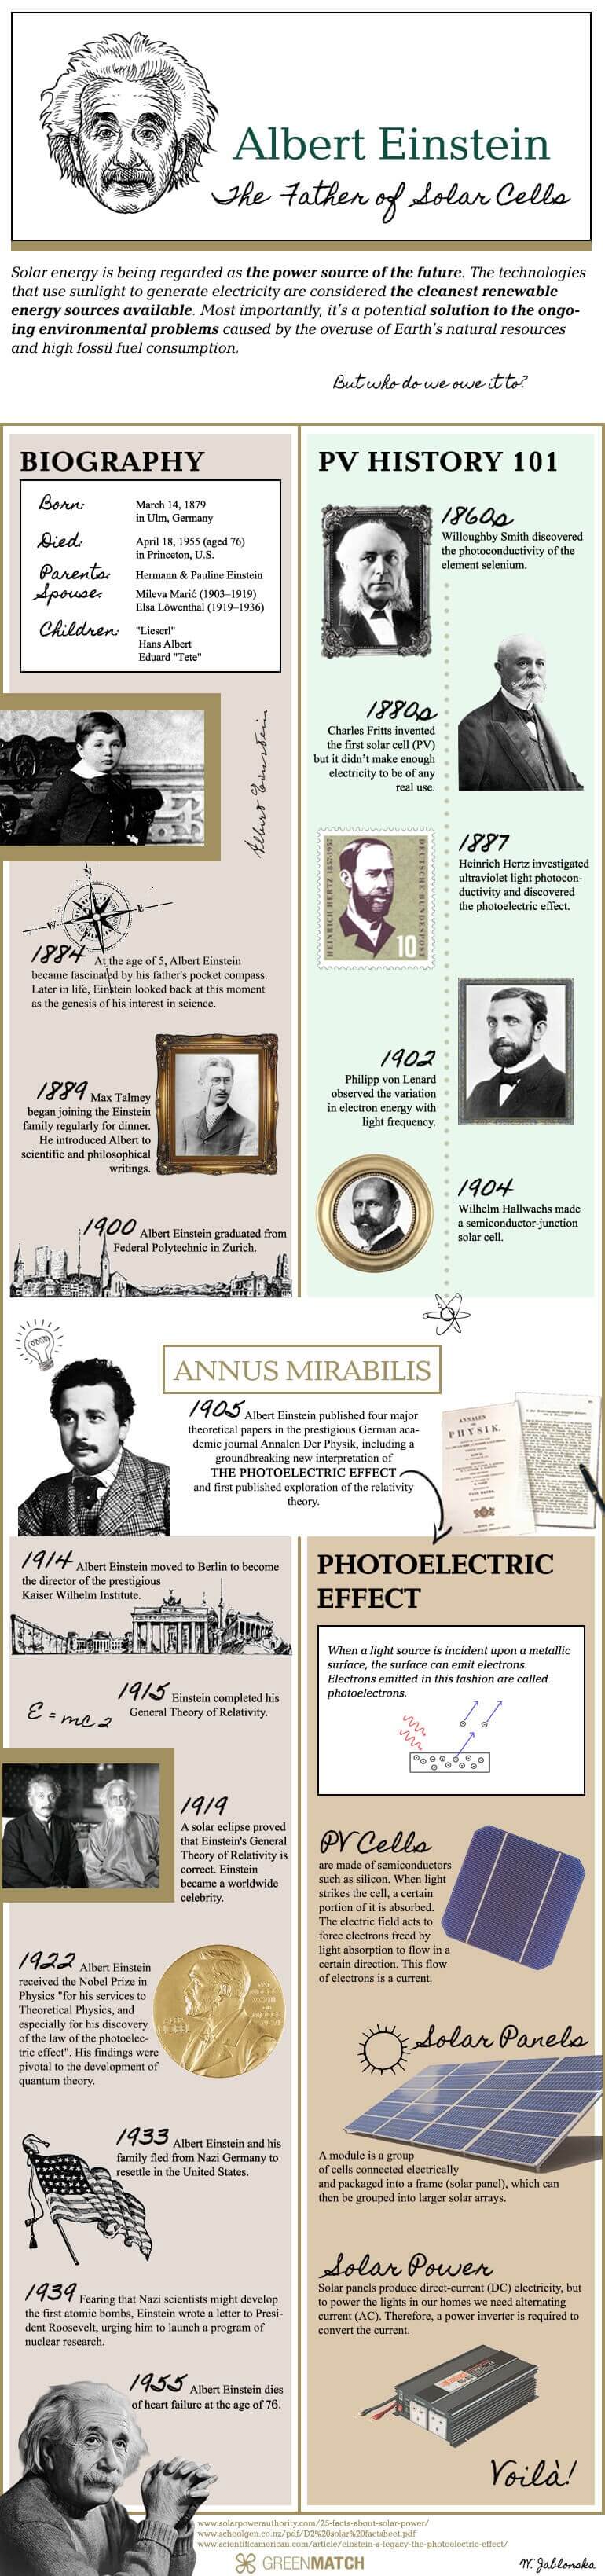 Infographic about Albert Einstein, The Father of Solar Cells